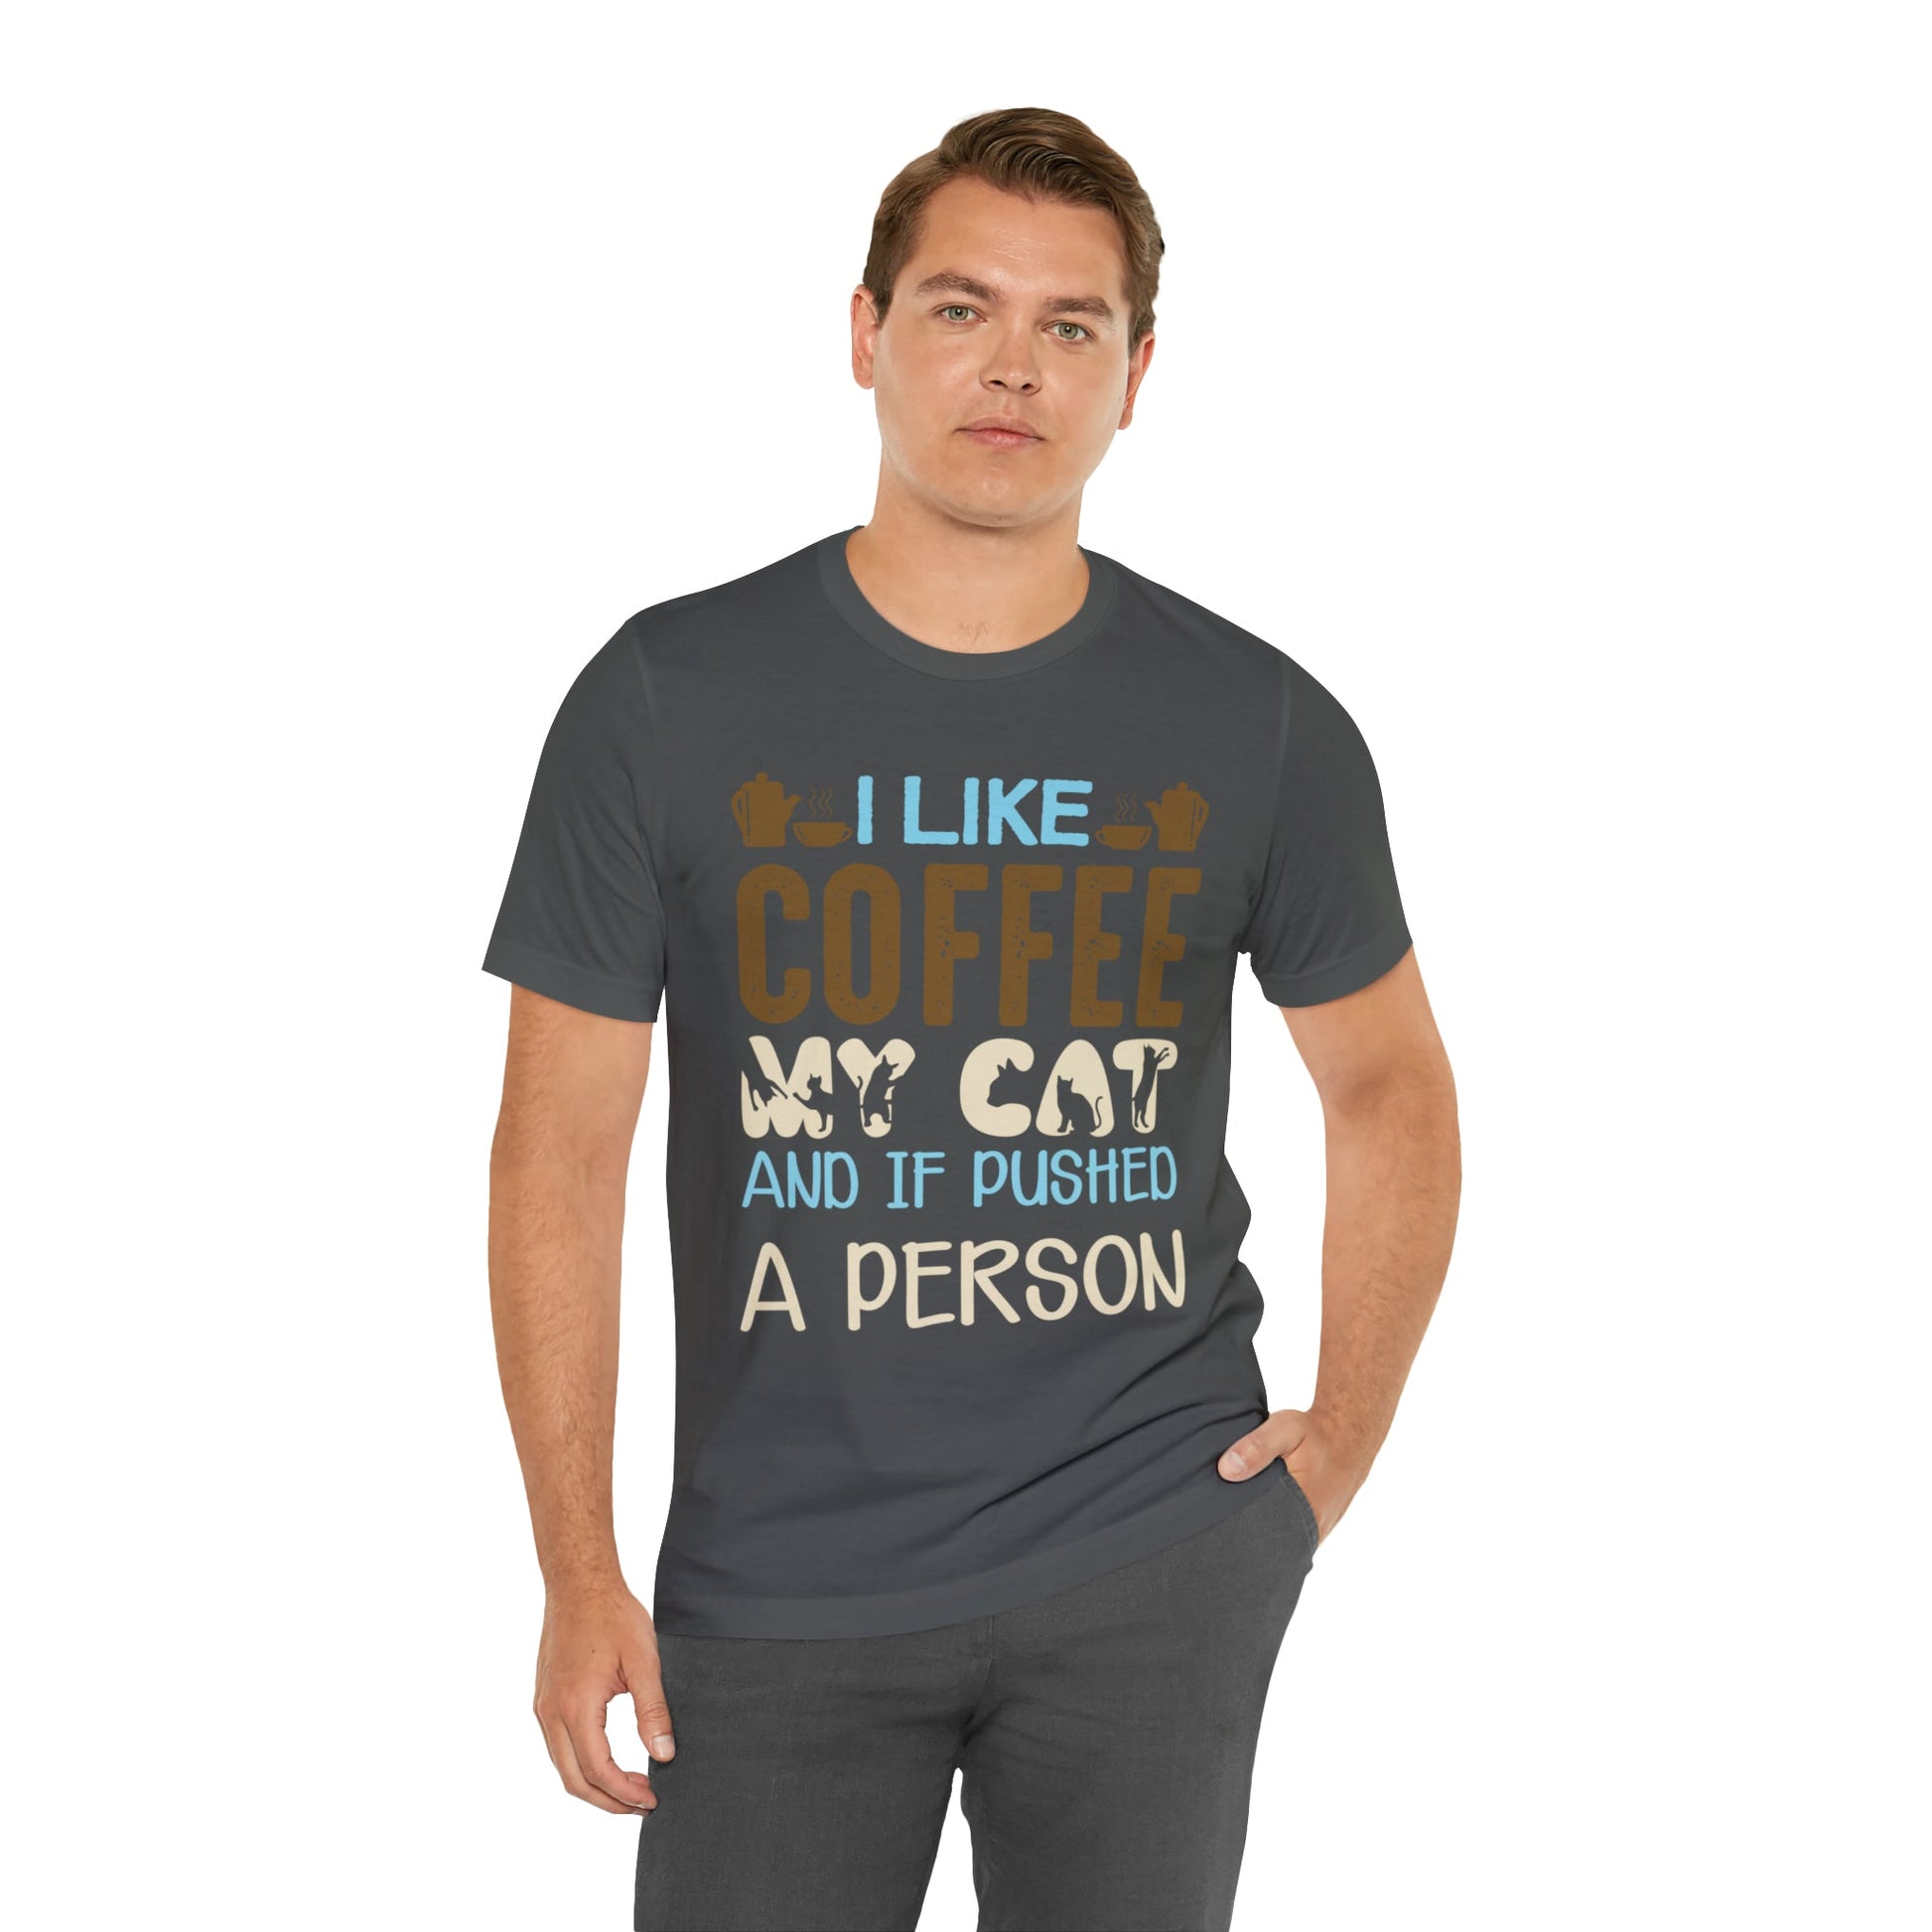 I Like Coffee, My Cat, and if pushed a person T-shirt. - InkArt Fashions